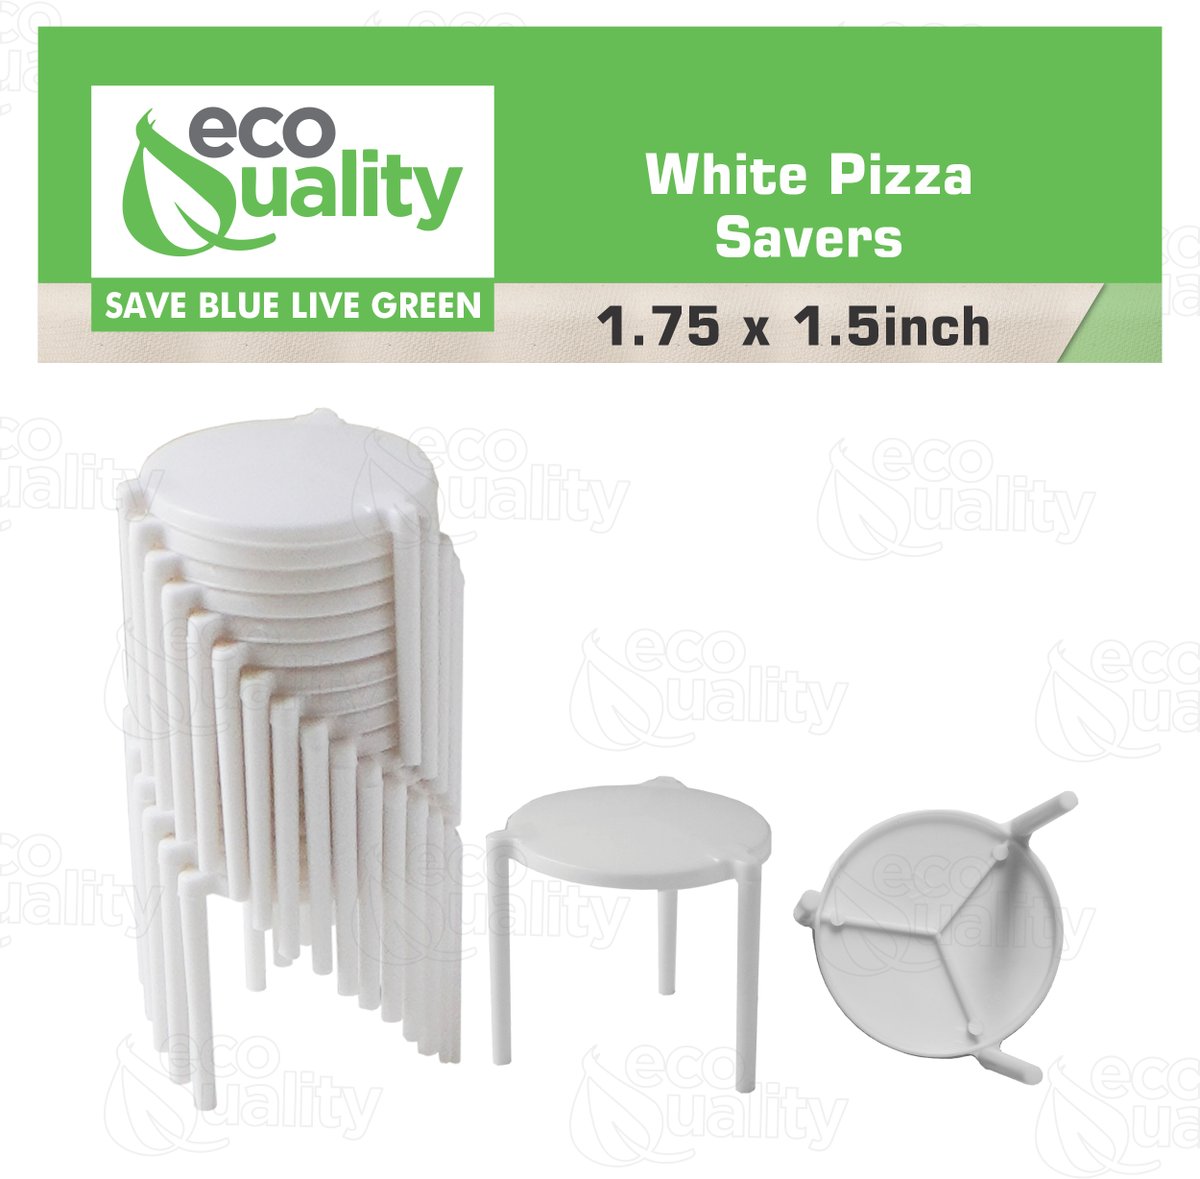 Shop our Pizza Toppers! 
ecoqualityinc.com
#pizza #pizzalover #pizzatime #pizzalovers #pizzaria #pizzahut #pizzalove #pizzaparty #pizzanight #pizzadelivery #pizzaislife #homemadepizza #pizzapizza #pizzaday #pizzalife #pizzariadelivery #pizzamaker #pizzafriday #ecoquality